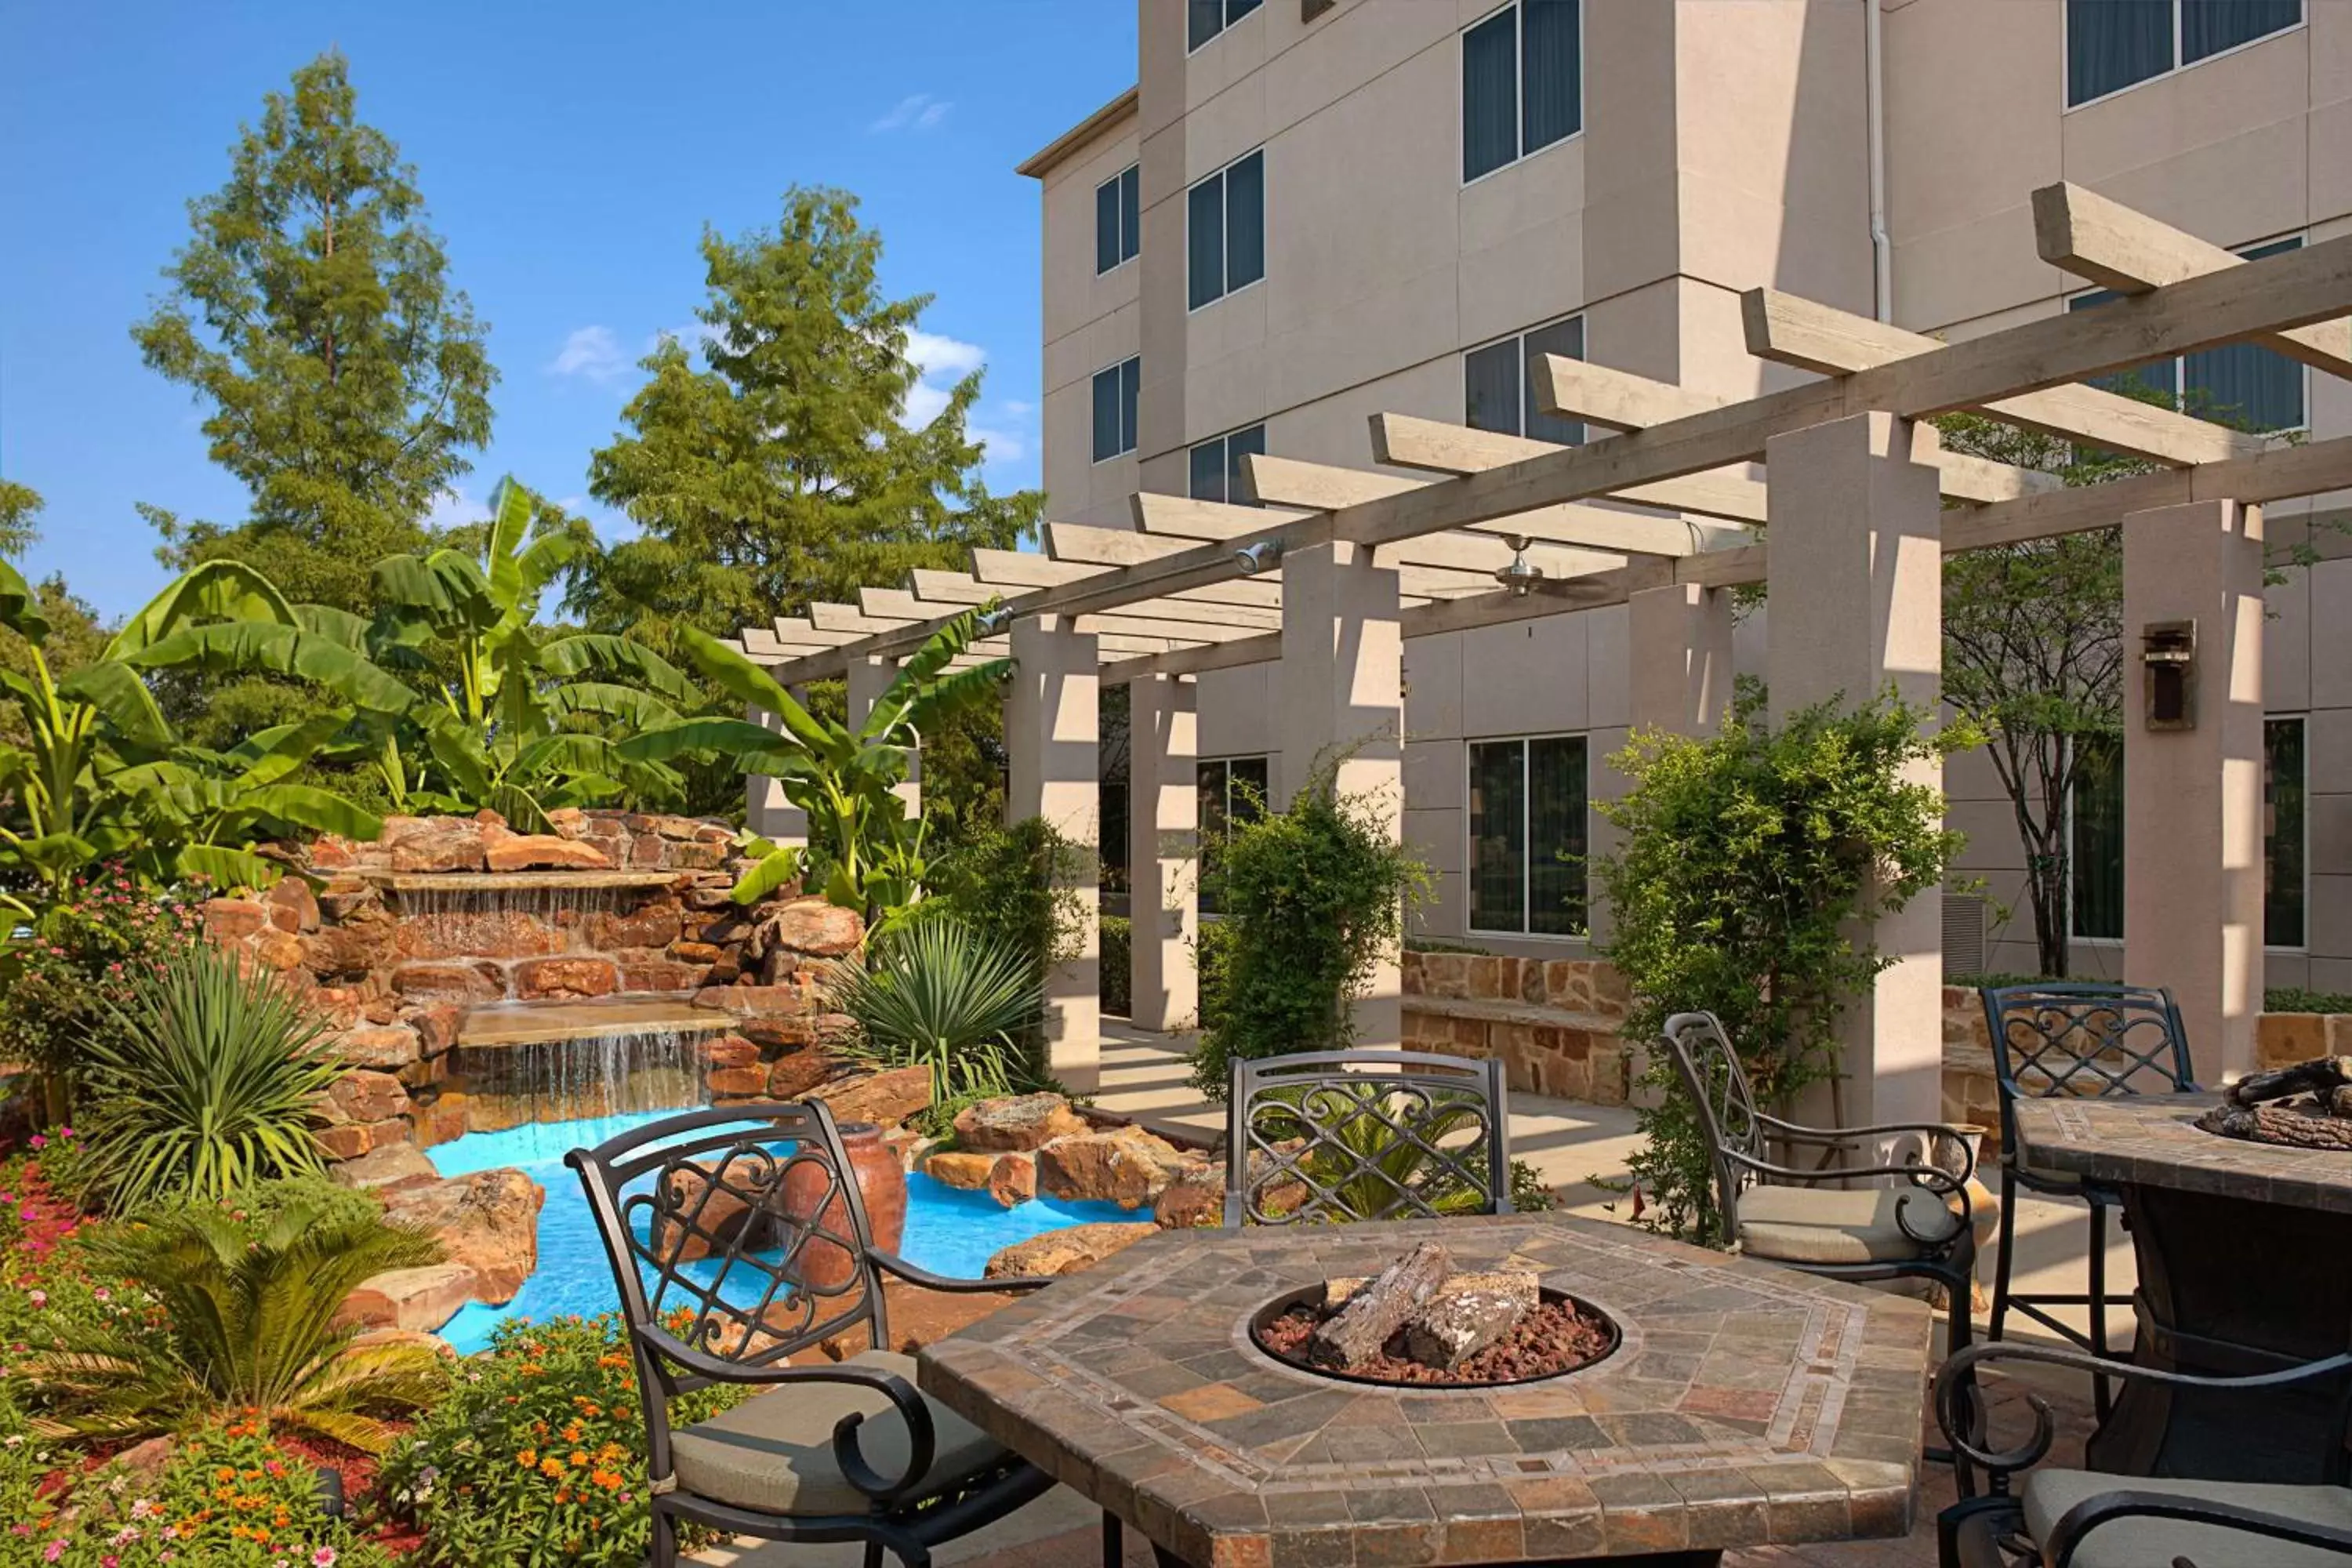 Property building, Swimming Pool in Hilton Garden Inn DFW Airport South